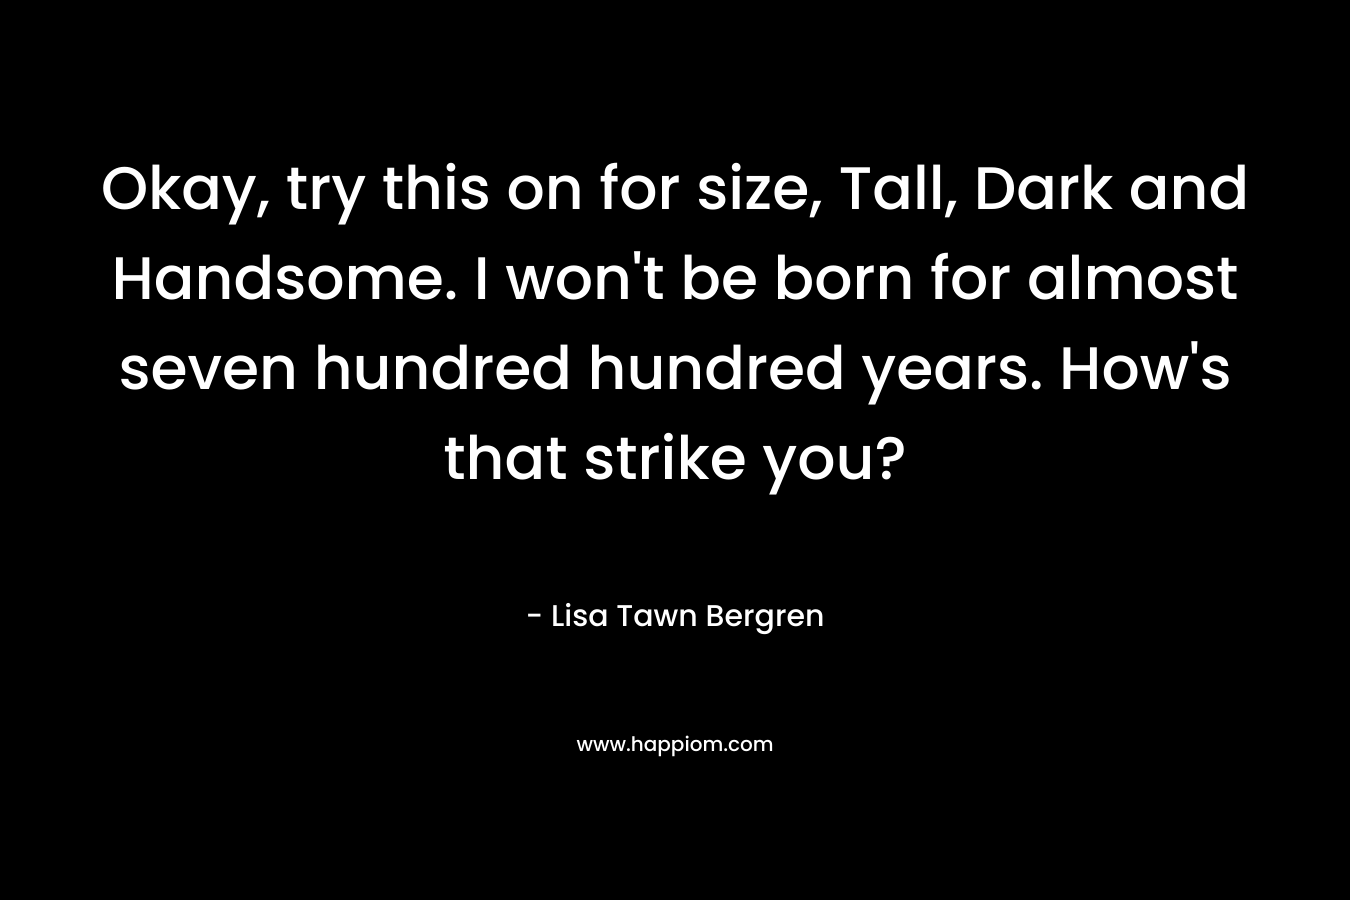 Okay, try this on for size, Tall, Dark and Handsome. I won't be born for almost seven hundred hundred years. How's that strike you?